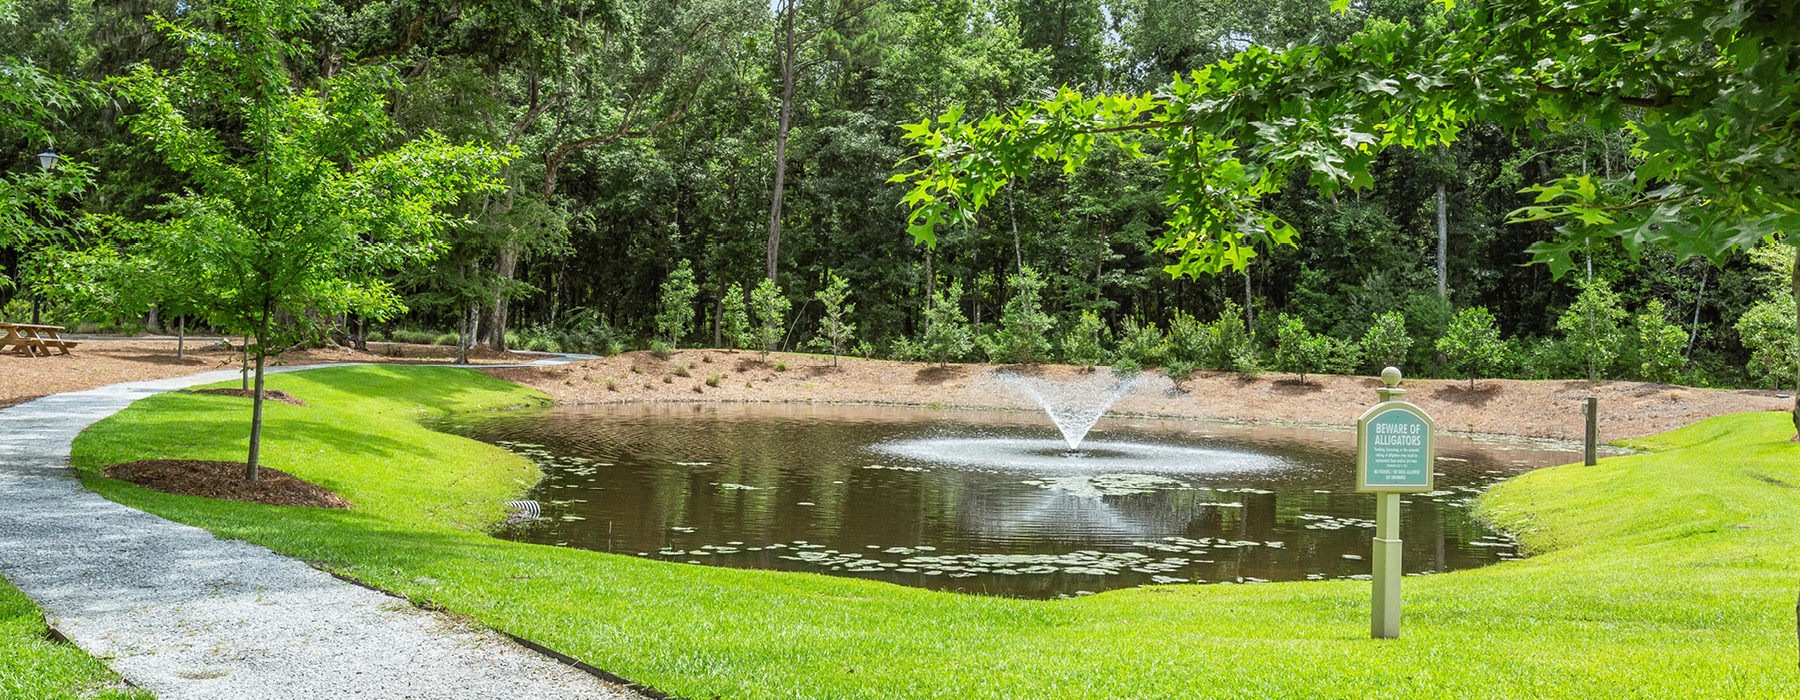 walking path in park near pond with water fountain